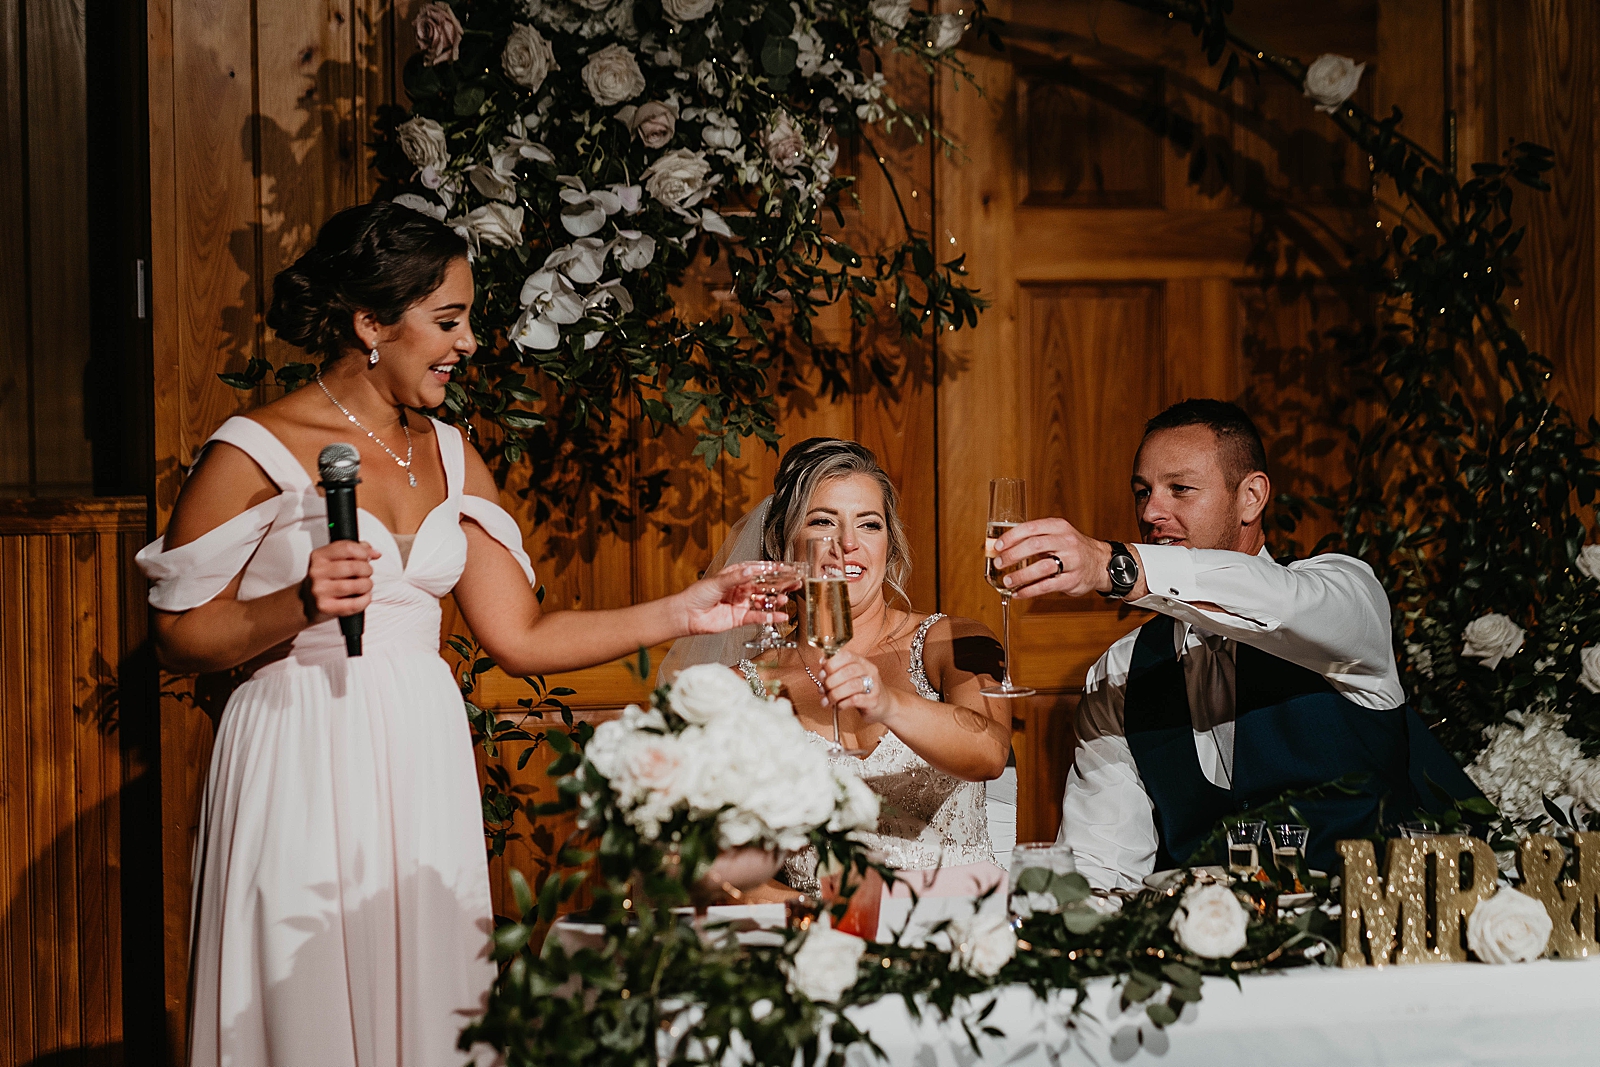 Maid of Honor toast by sweetheart table at Reception